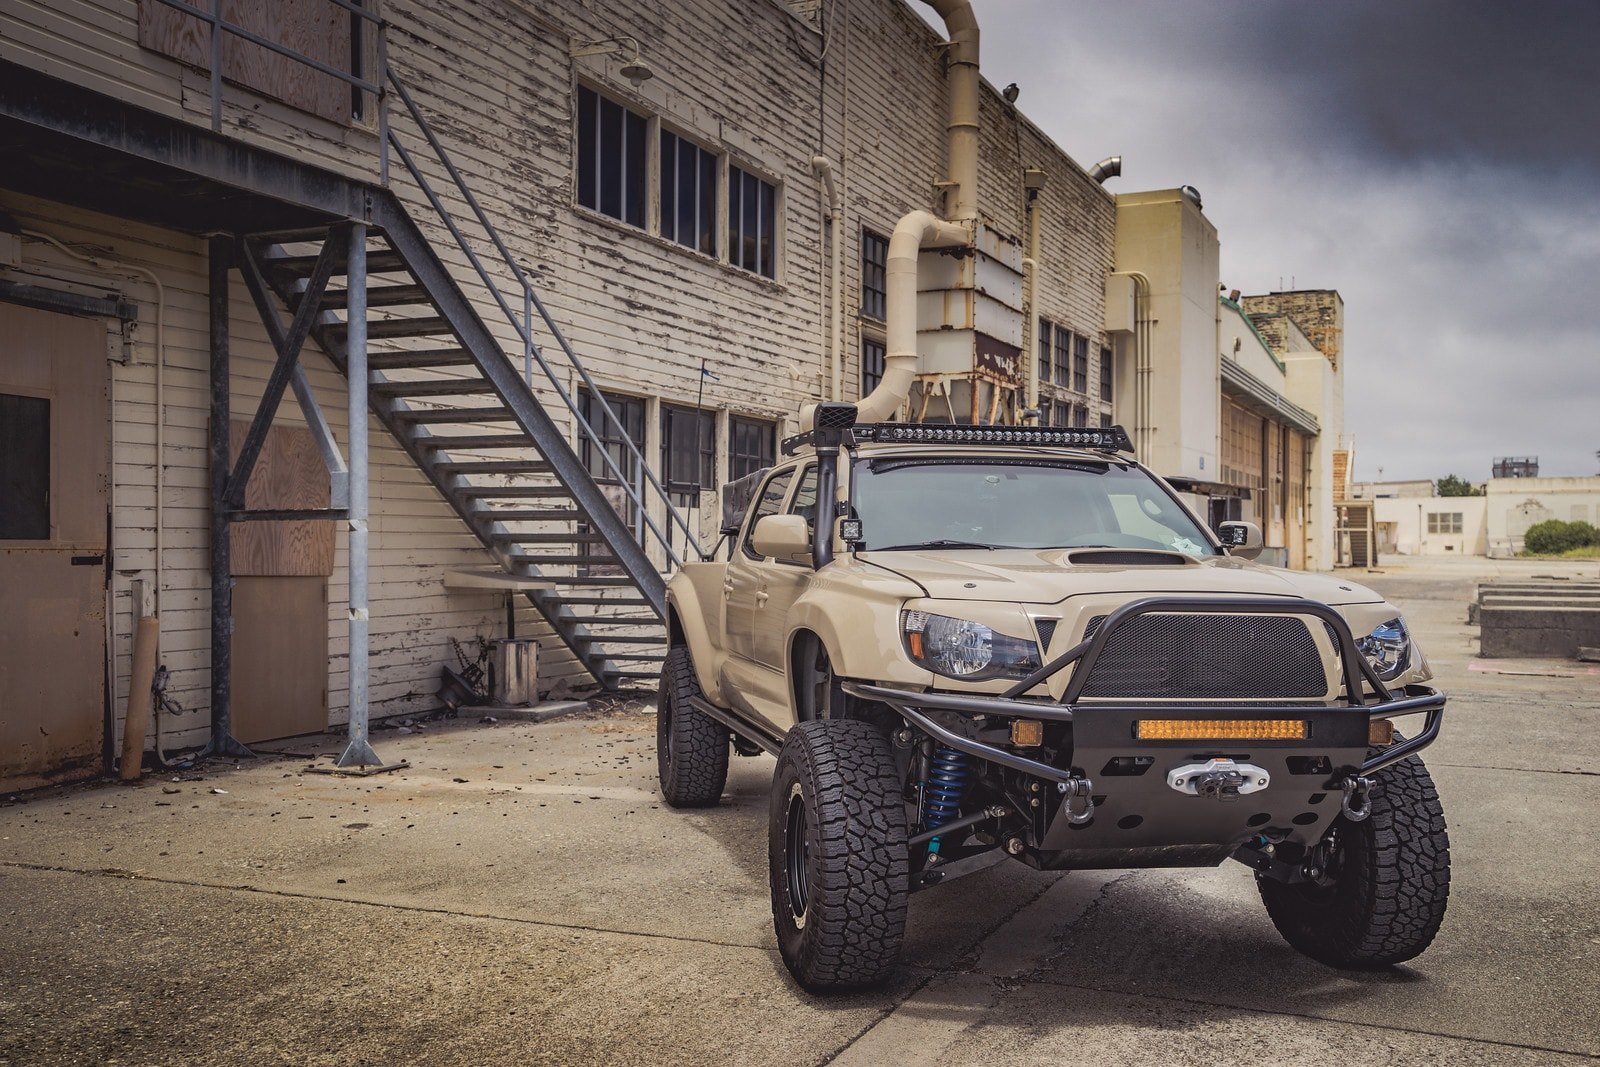 Lifted Toyota Tacoma on 35» wheels - Photo by Grillcraft